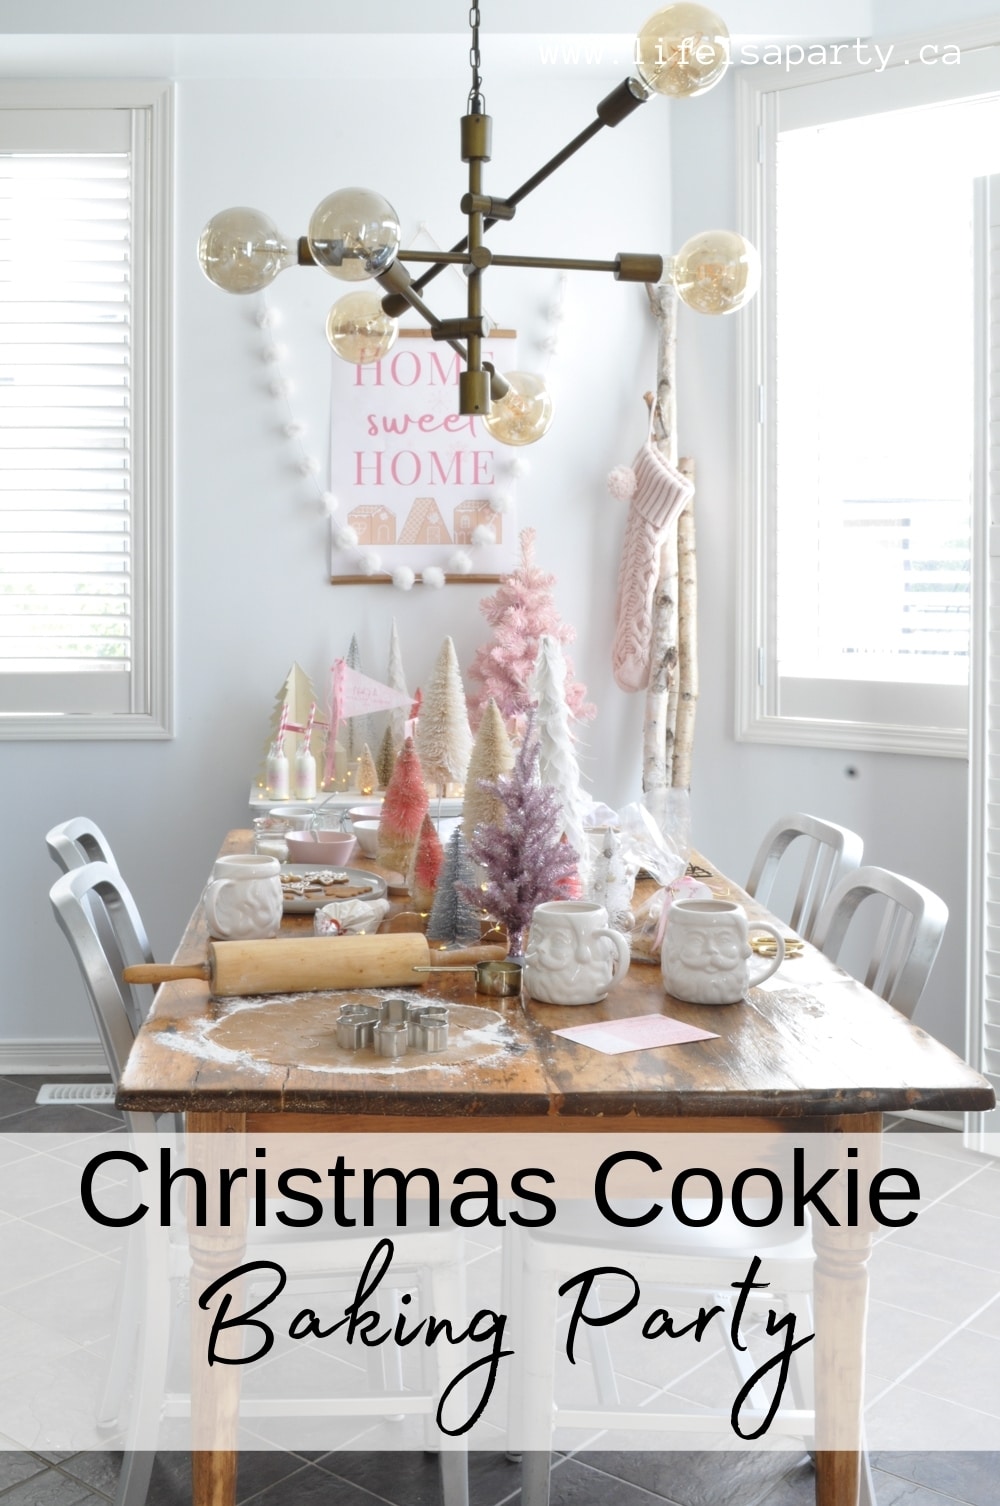 Christmas Cookie Baking Party: ideas and printables for a baking party, a Christmas cookie exchange, or a gingerbread house decorating party.